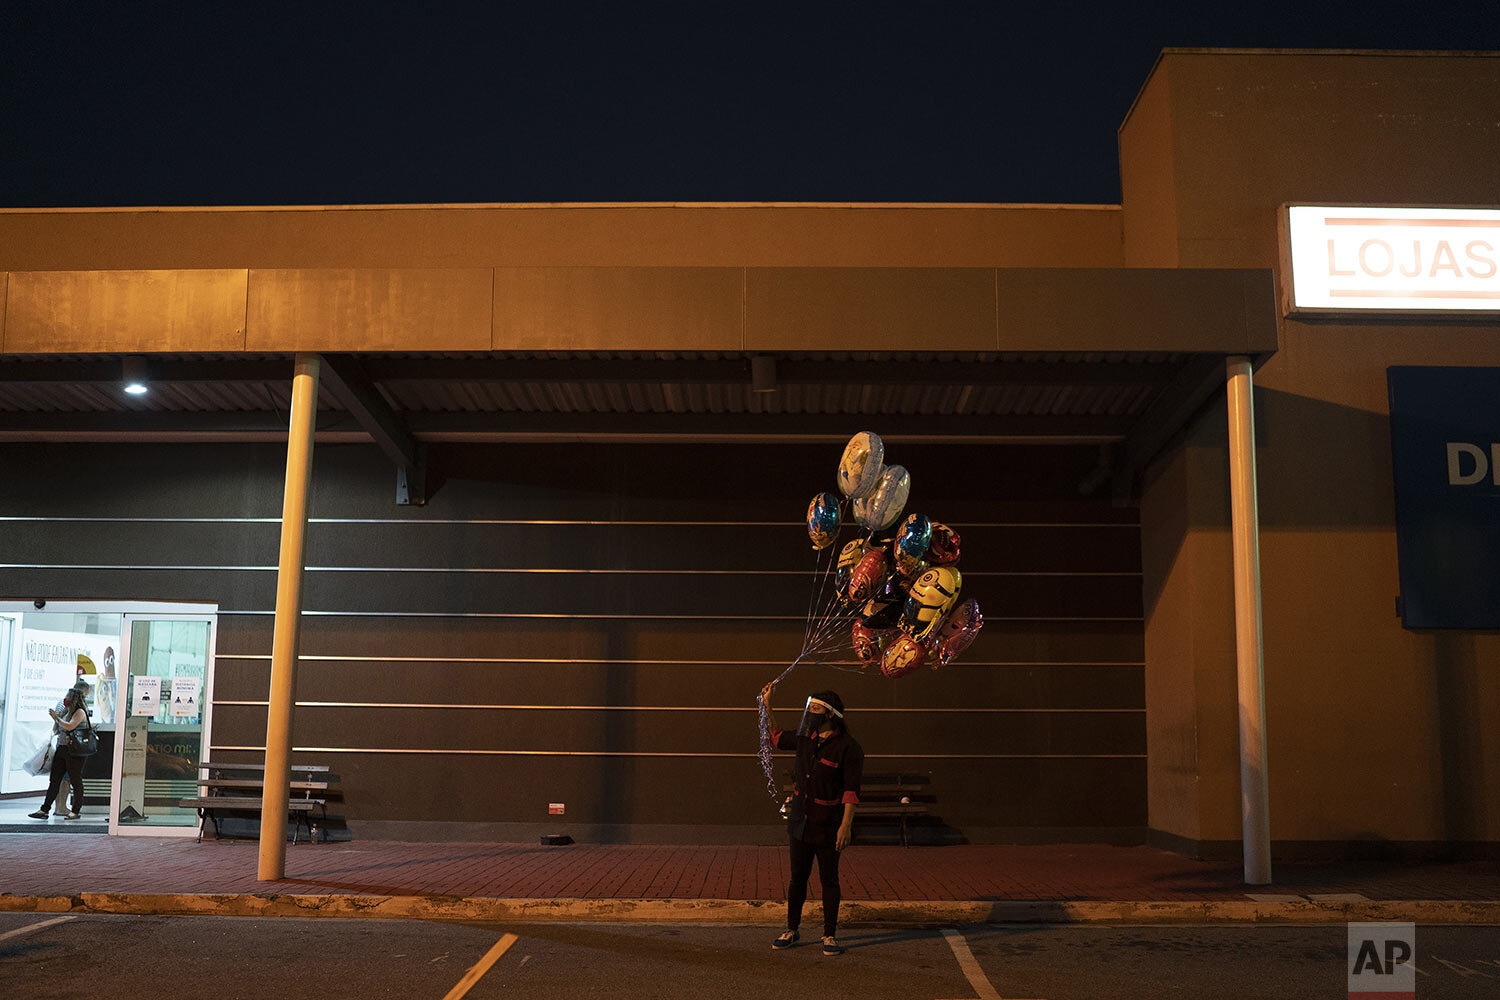  A circus vendor holds balloons  at the entrance of the Estoril Circus drive-in show in Itaguai, in greater Rio de Janeiro, Brazil, July 18, 2020. (AP Photo/Leo Correa) 